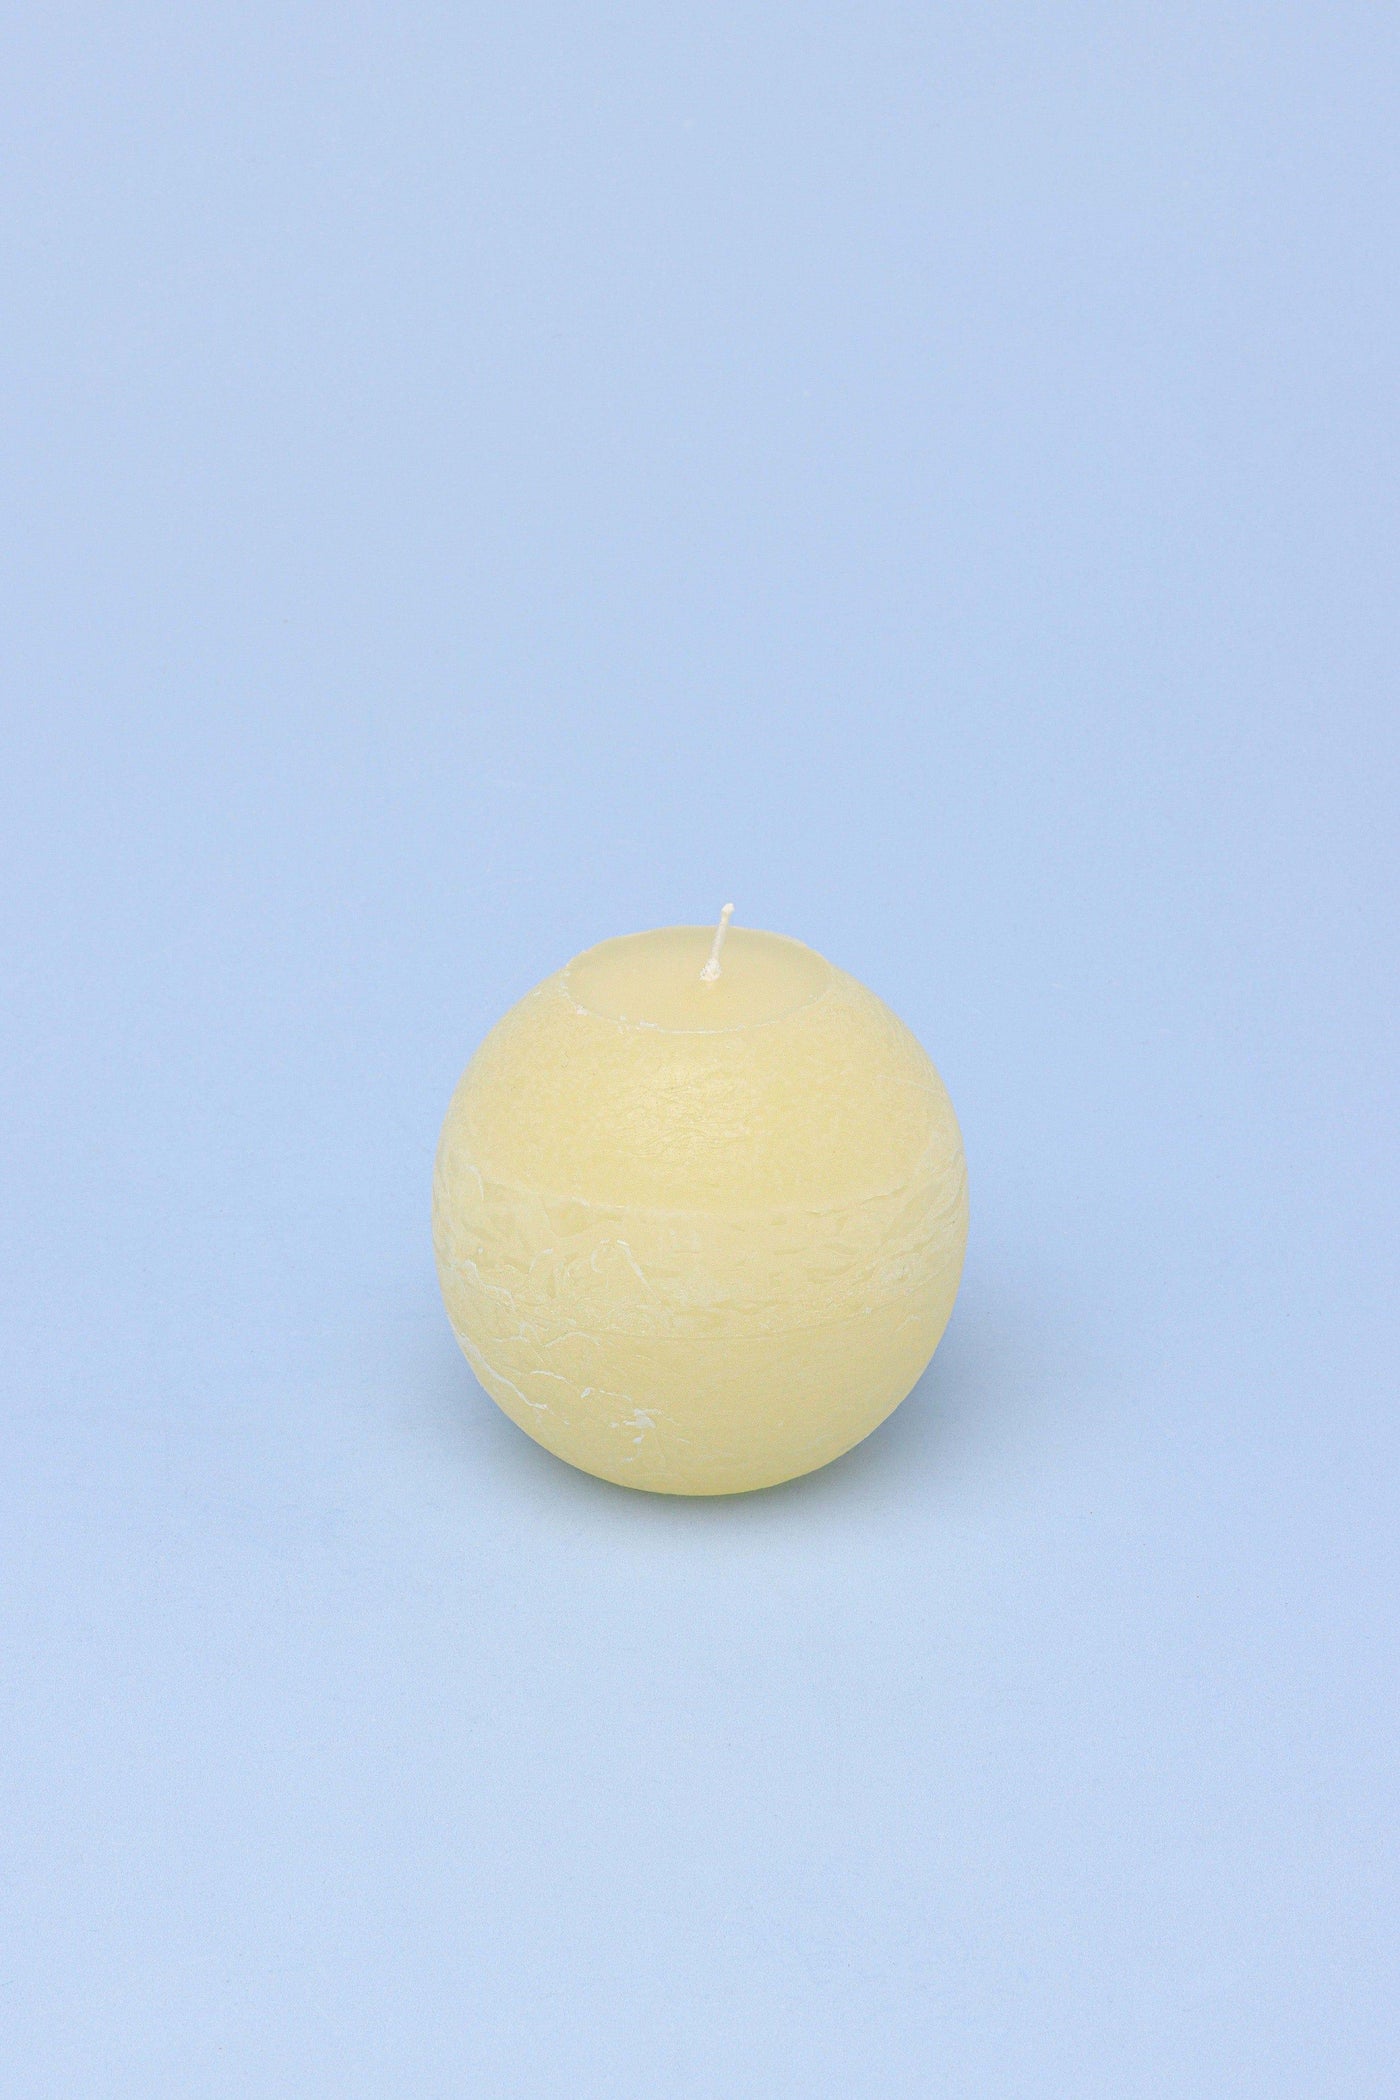 Gdecorstore Candles & Candle Holders Yellow / Medium Georgia Ivory Ombre Sphere Ball Candles